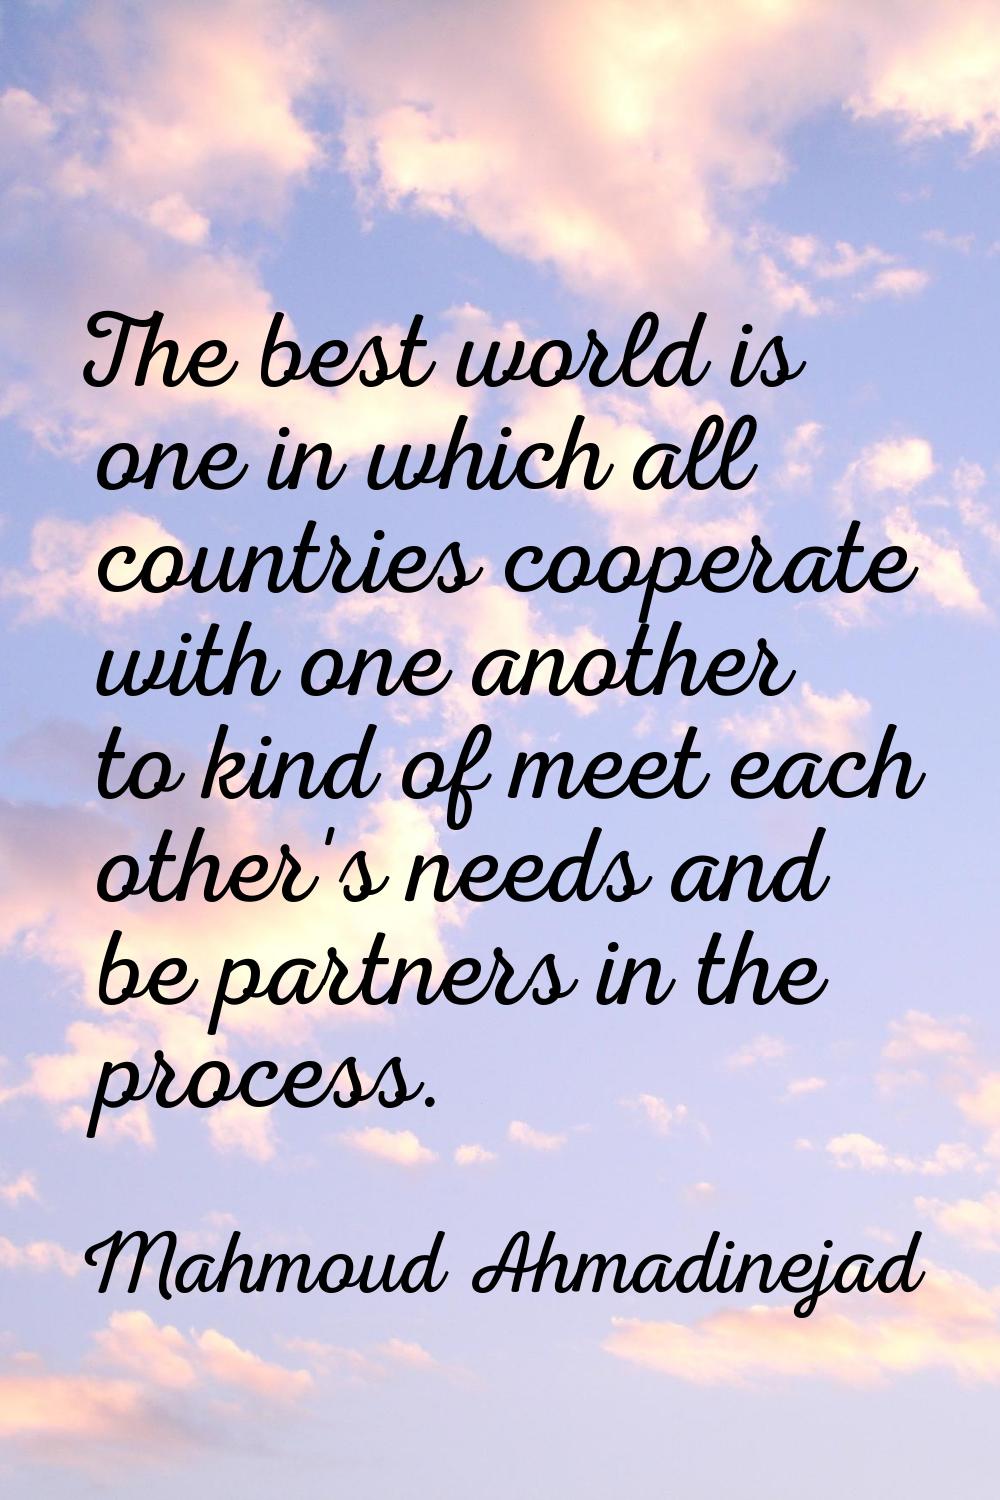 The best world is one in which all countries cooperate with one another to kind of meet each other'